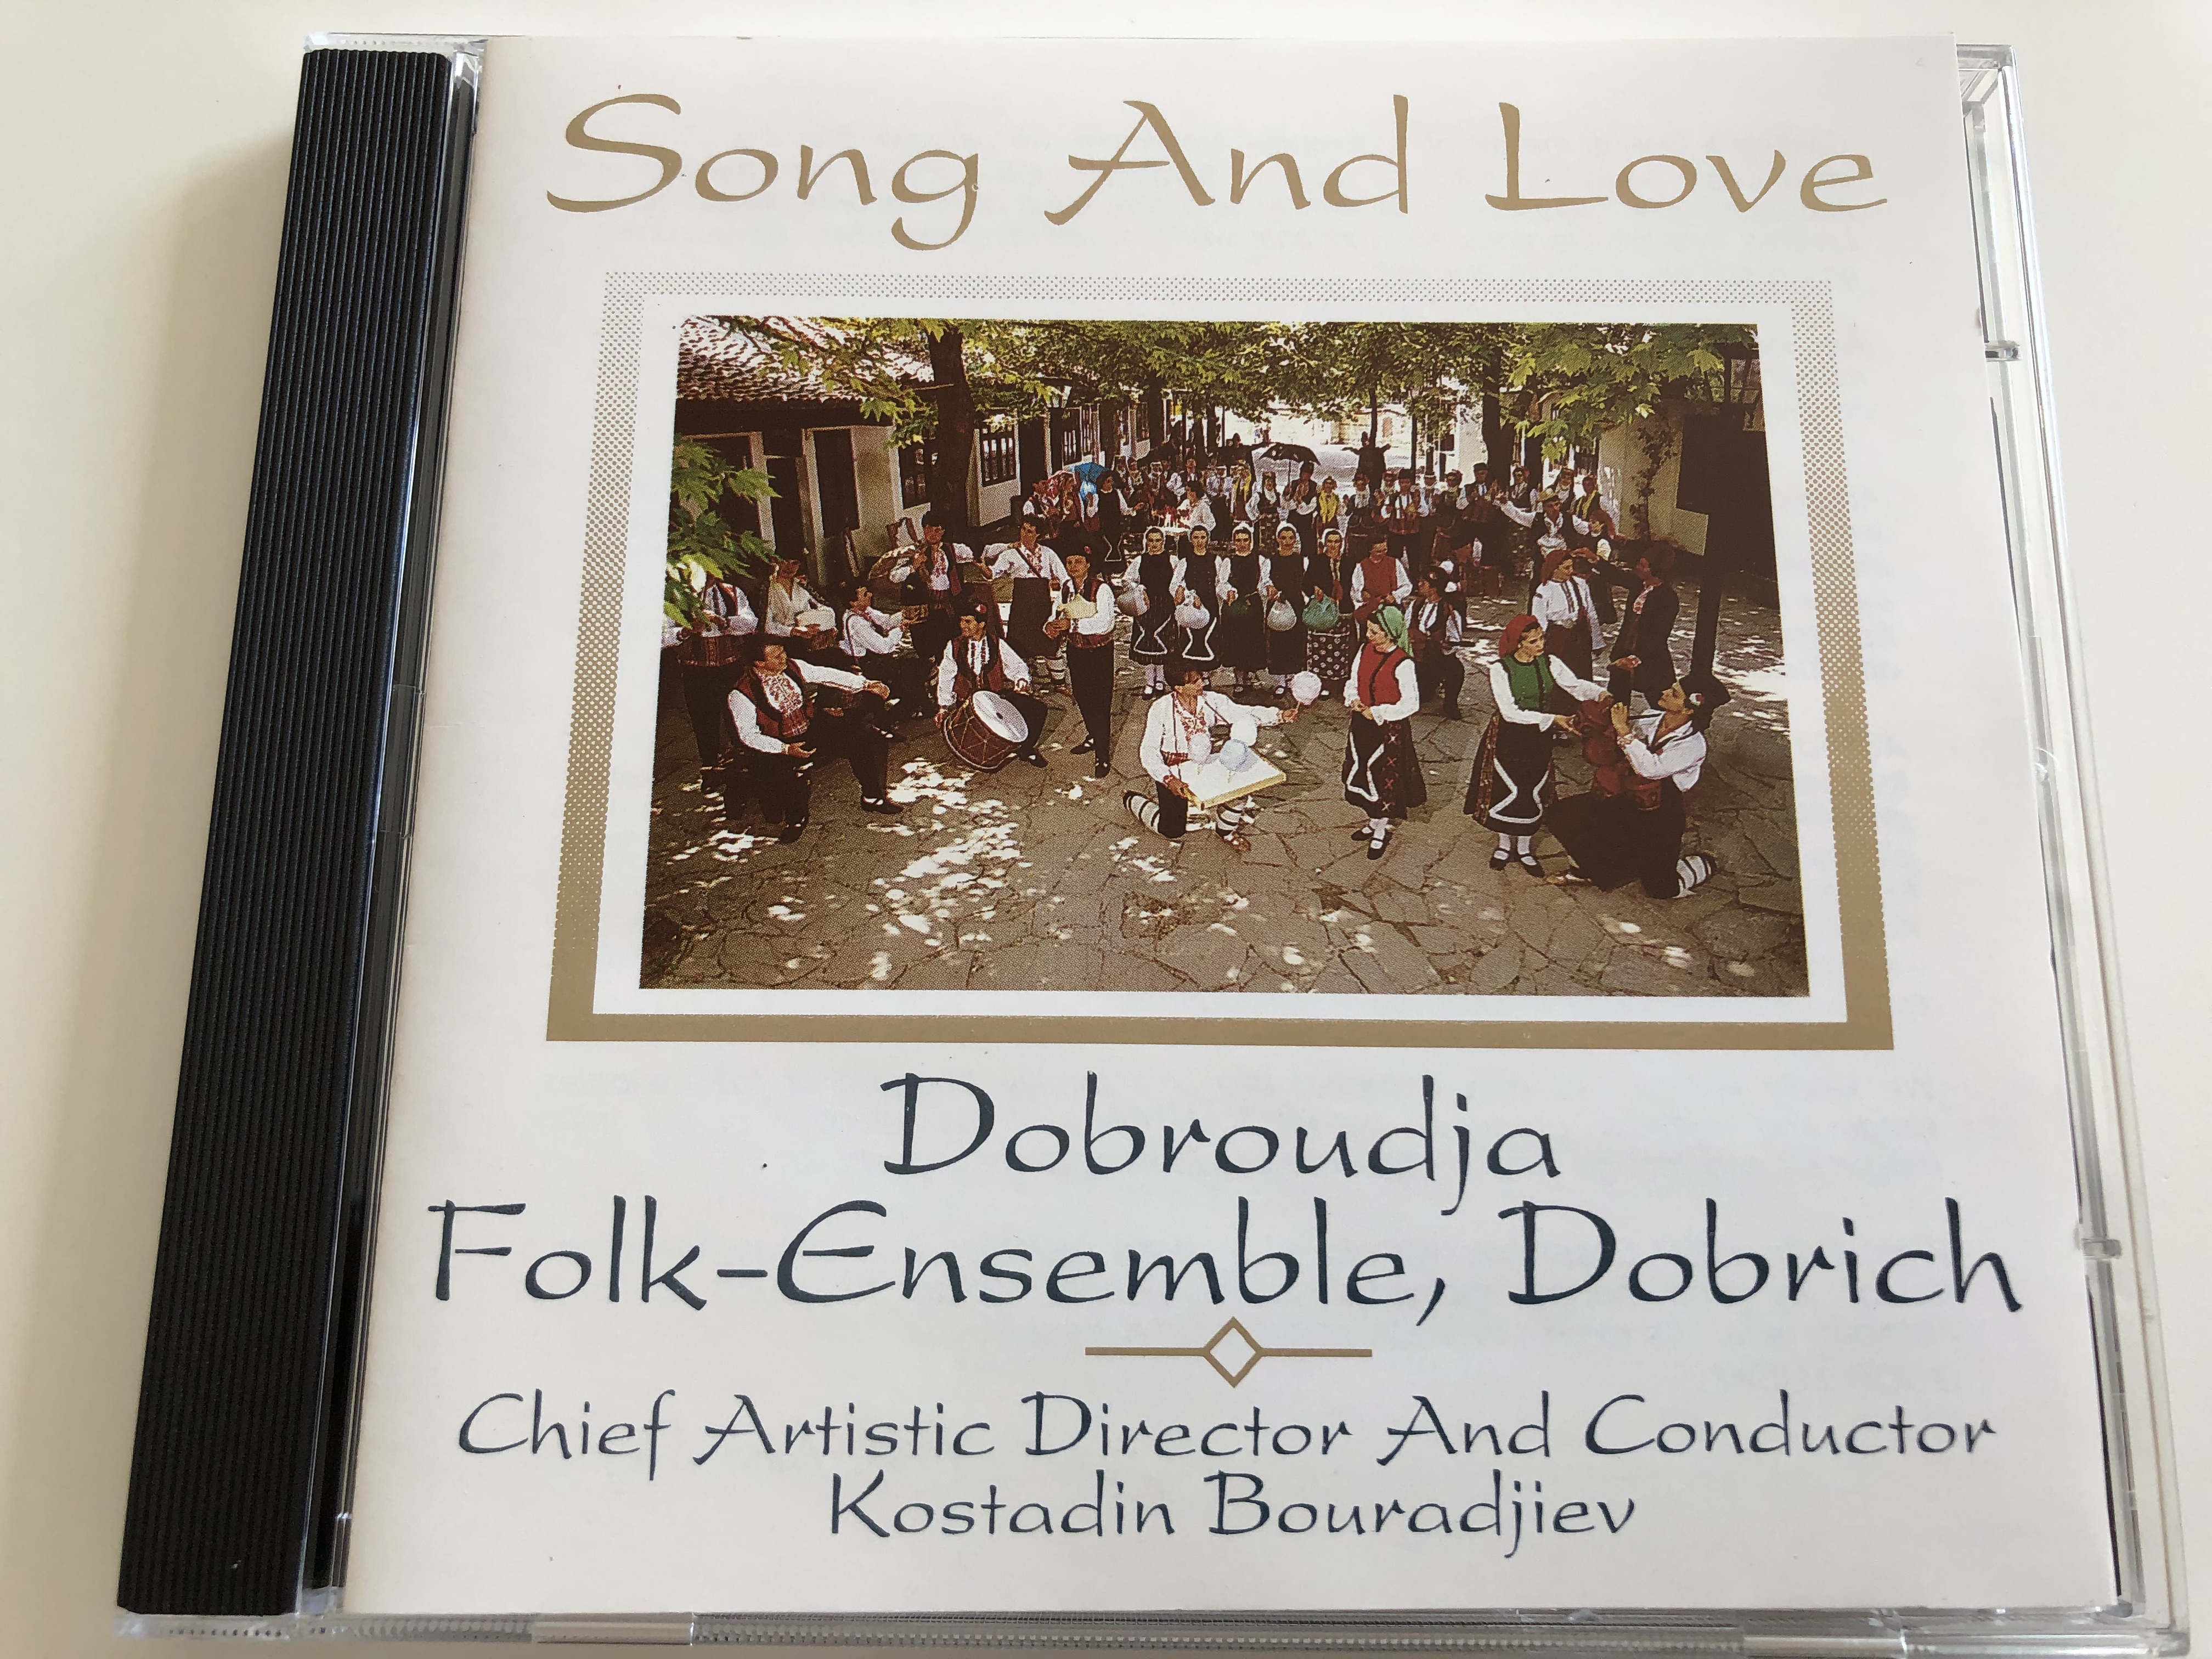 song-and-love-dobroudja-folk-ensemble-dobrich-chief-artistic-director-and-conductor-konstadin-bouradjiev-audio-cd-stereo-060155-1-.jpg